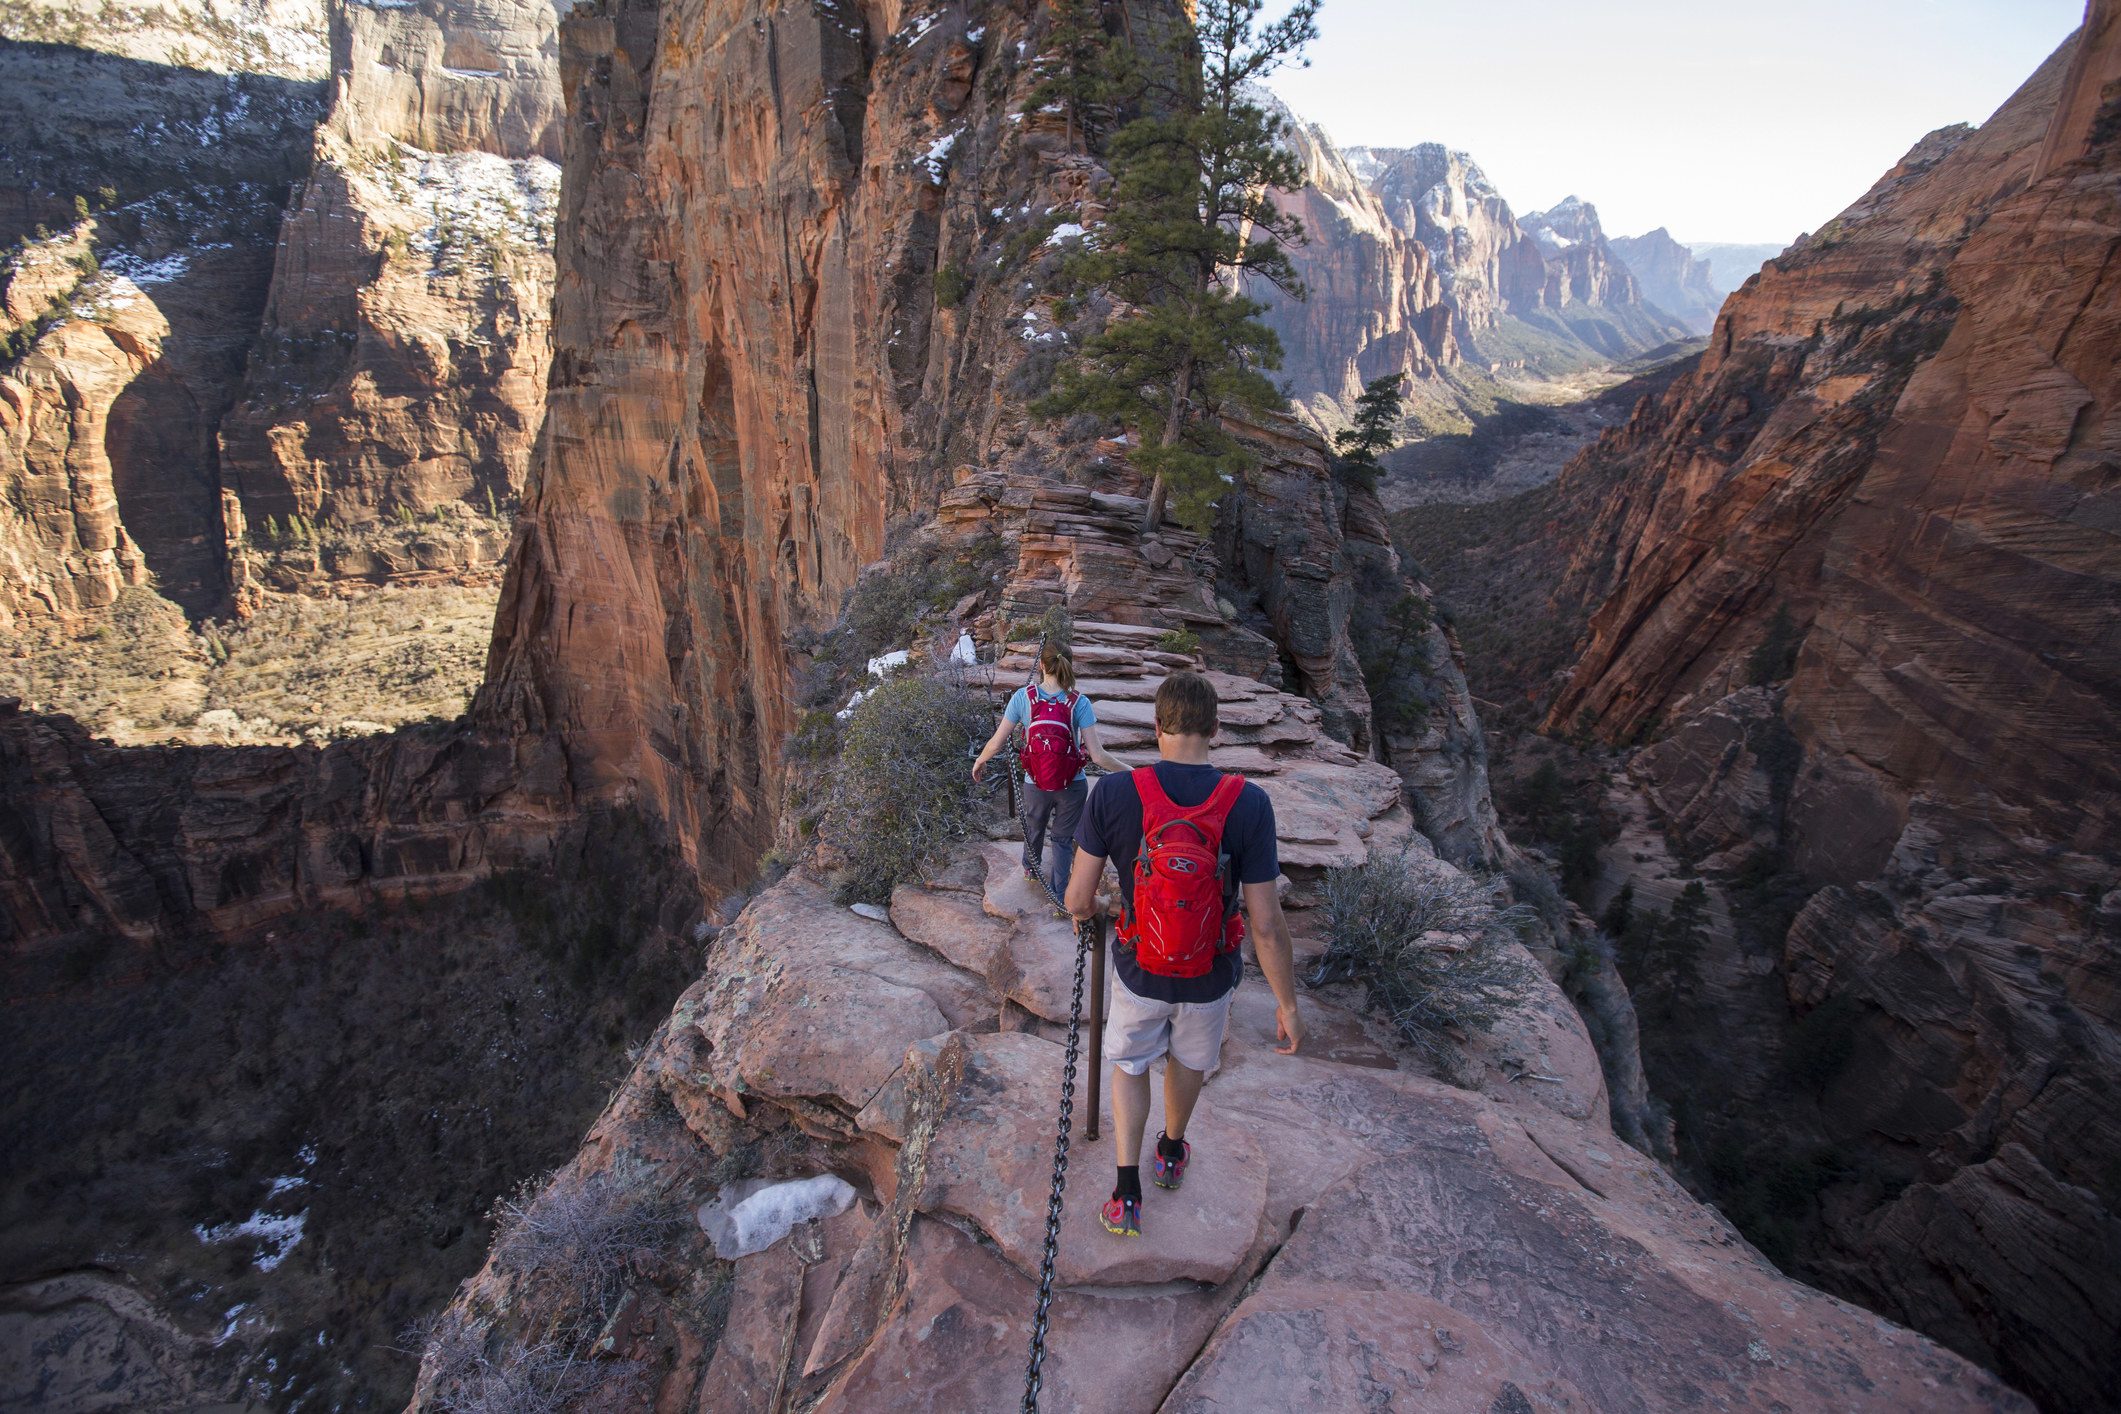 A pair of hikers walking along Angels Landing with a steep drop-off on either side in Zion National Park